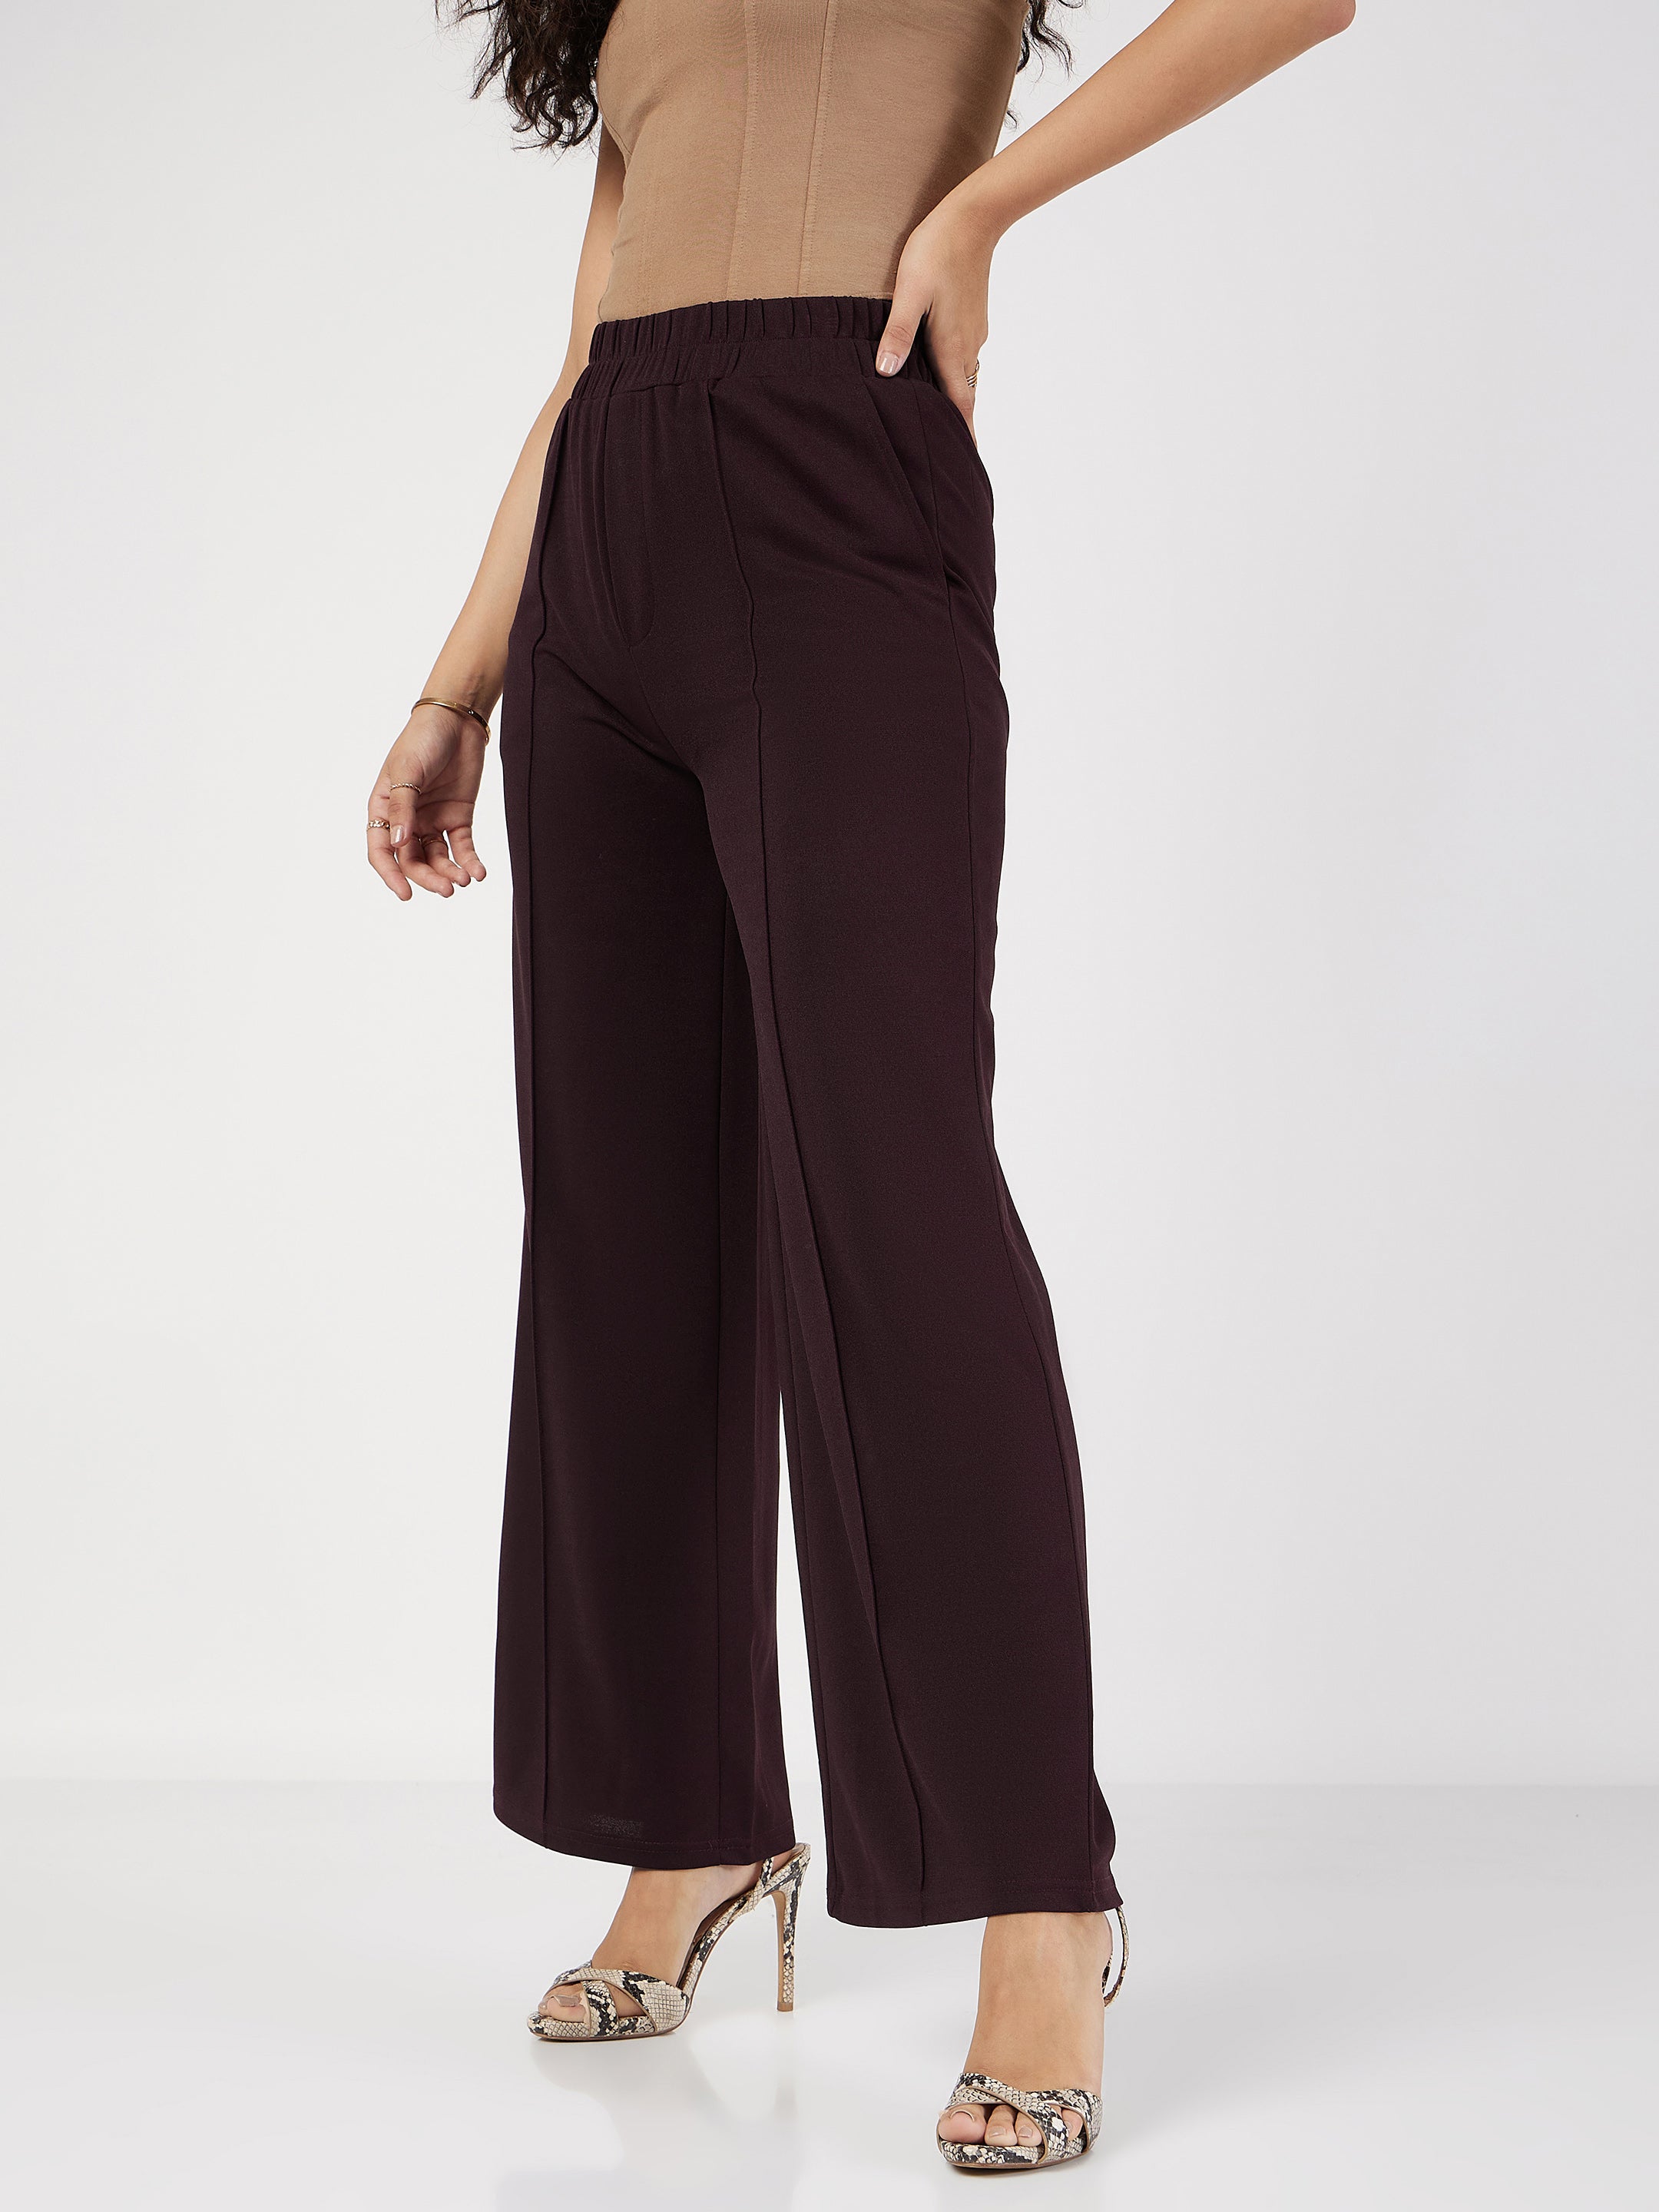 Buy Latest Women Palazzo Pants Online In India | Palazzo and Pants – Page  12 – Stilento